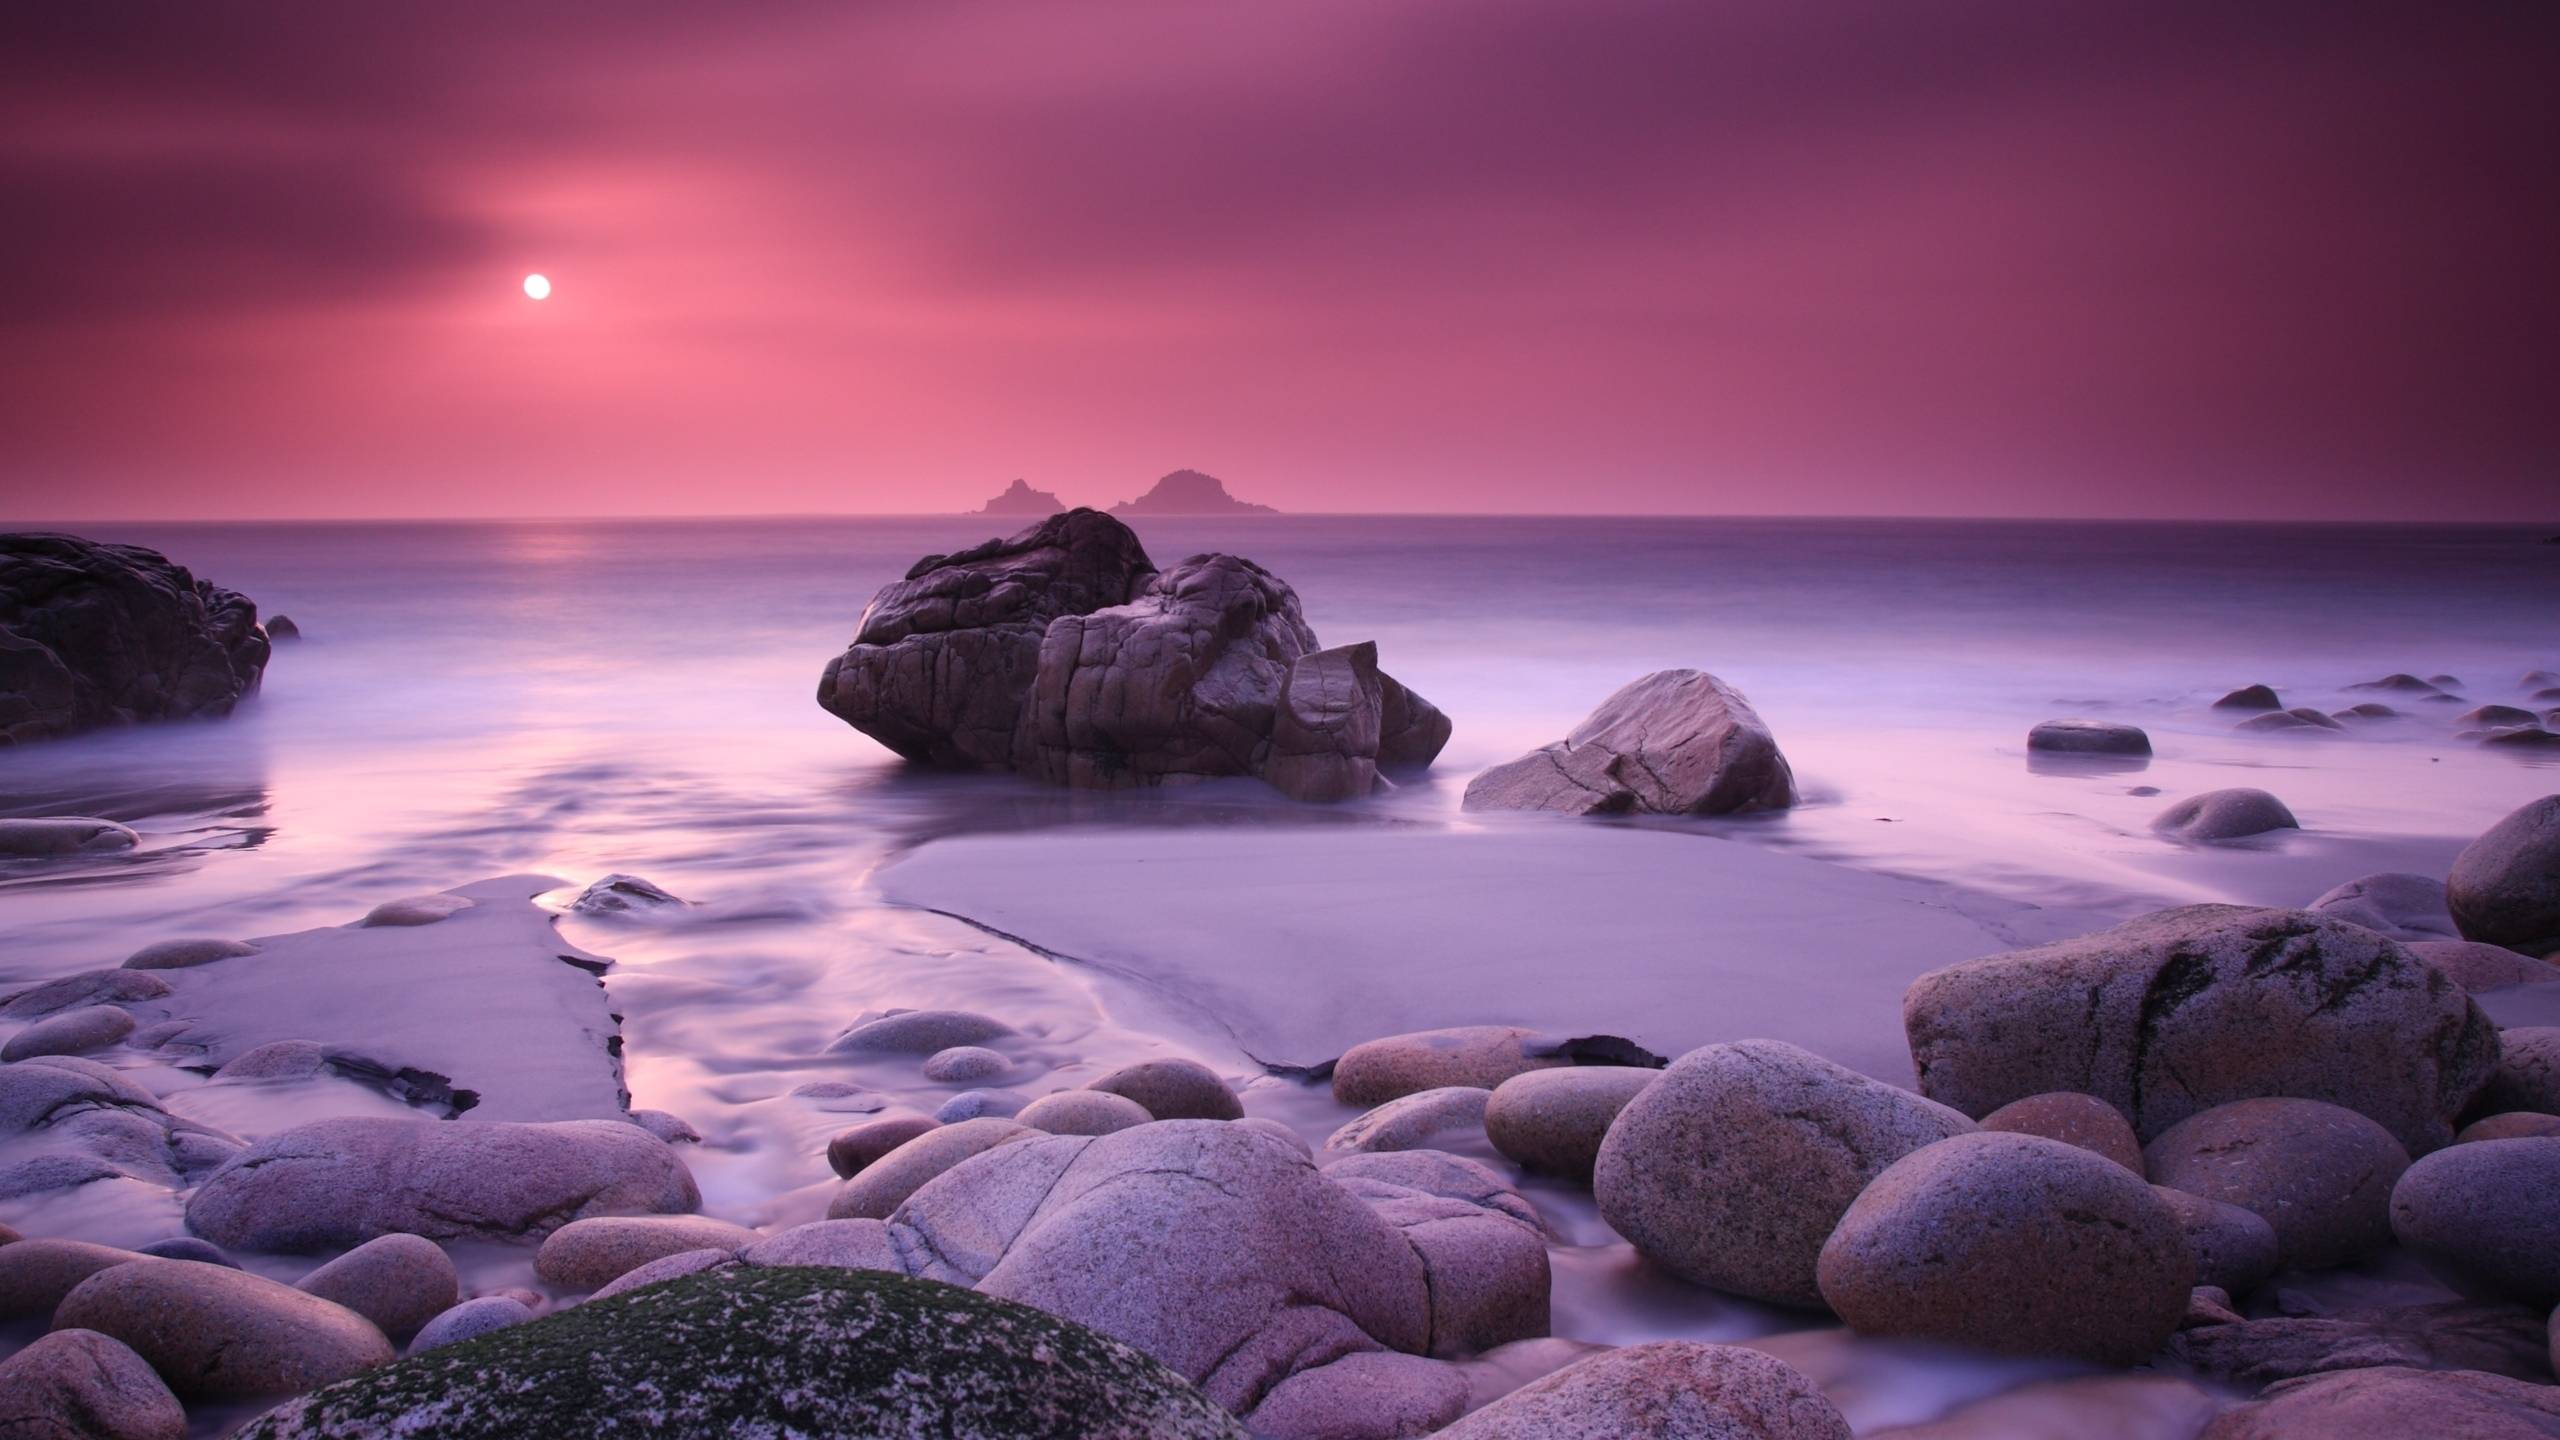 Pink Haze and Stones Wallpaper for Your iMac. HD Wallpaper Source